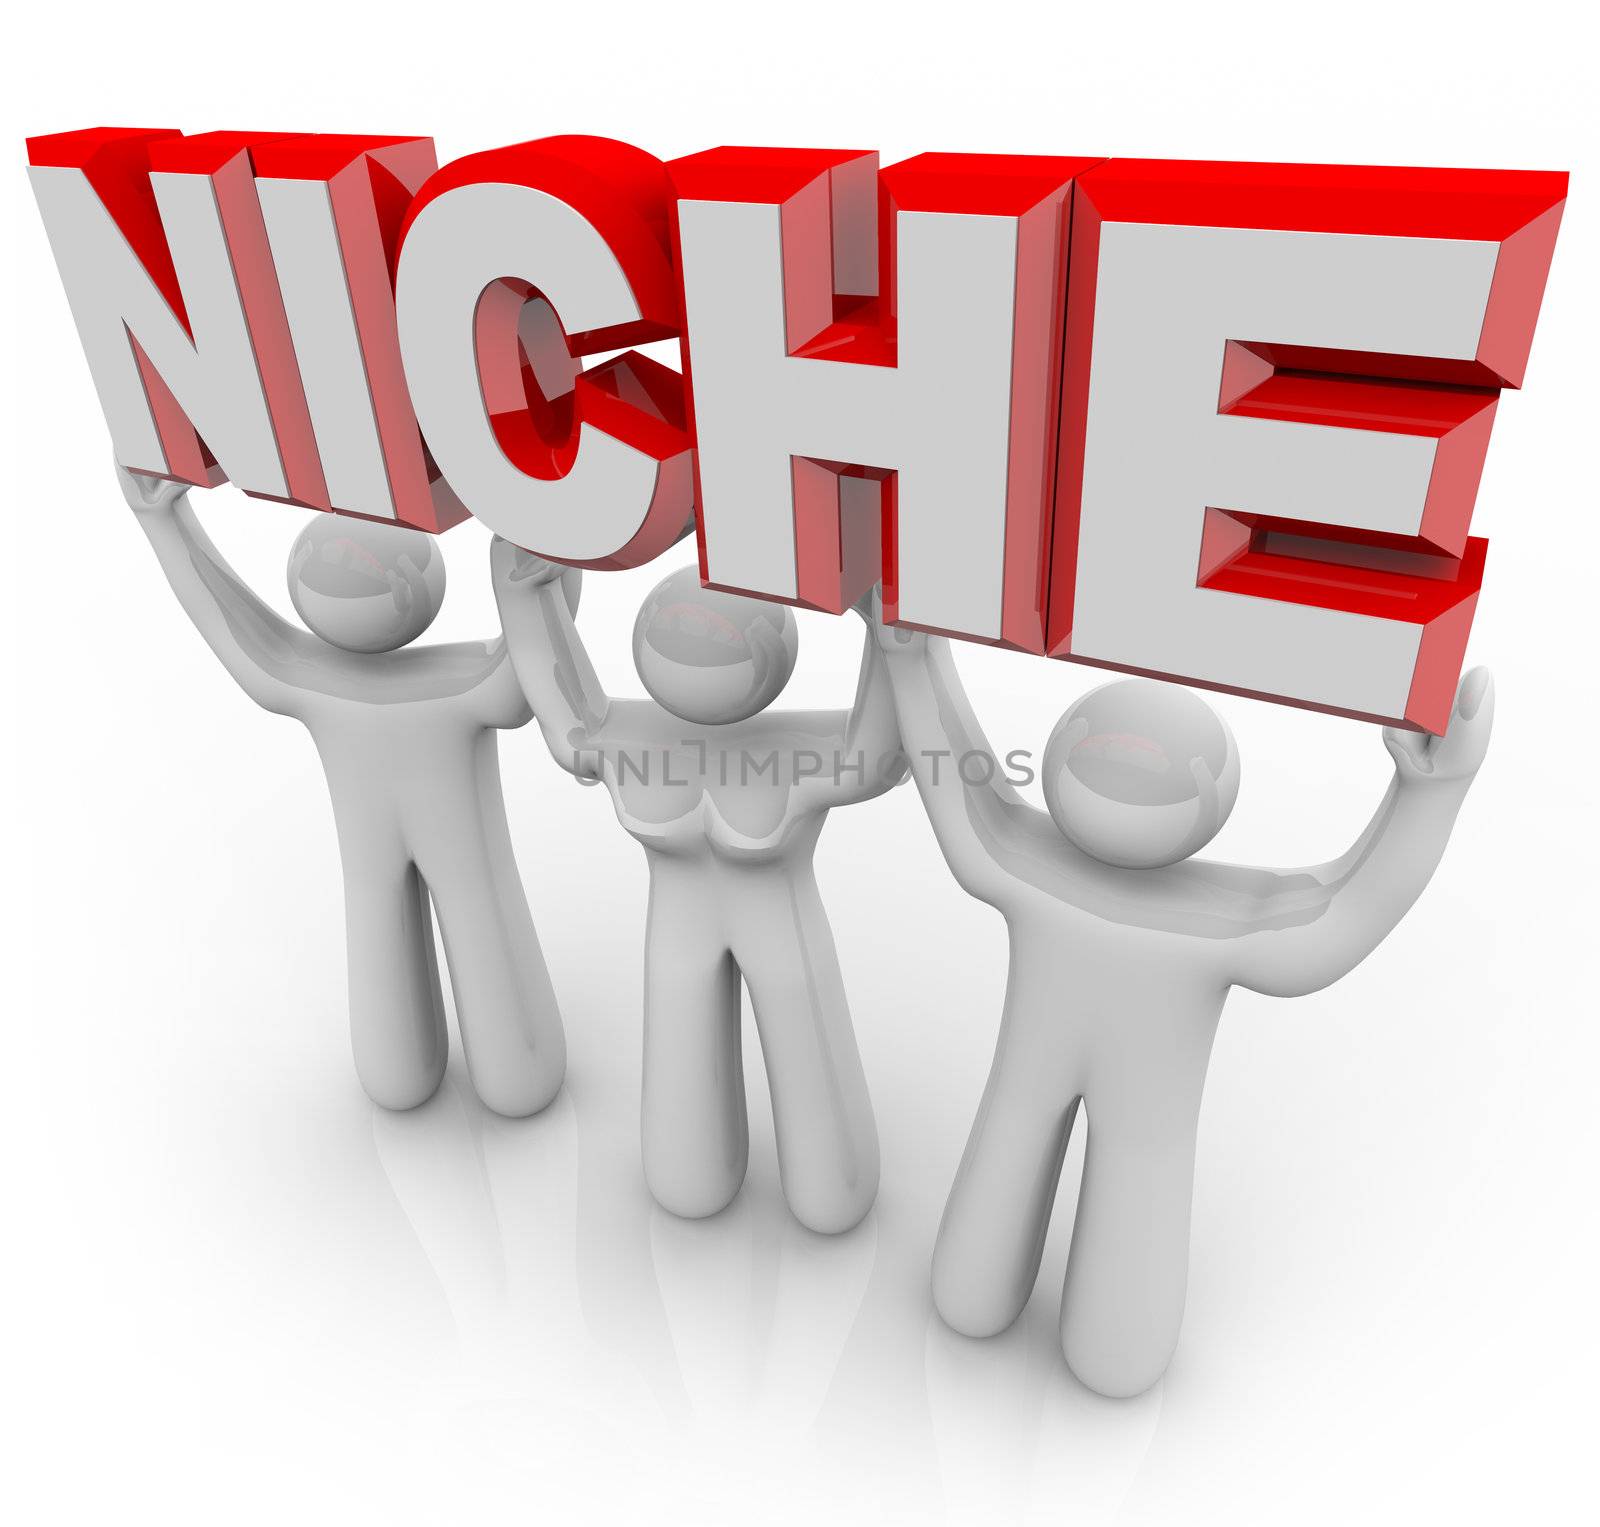 A team of people lift the word Niche symbolizing a unique group of customers who can be marketed and sold to by nature of their special wants and needs